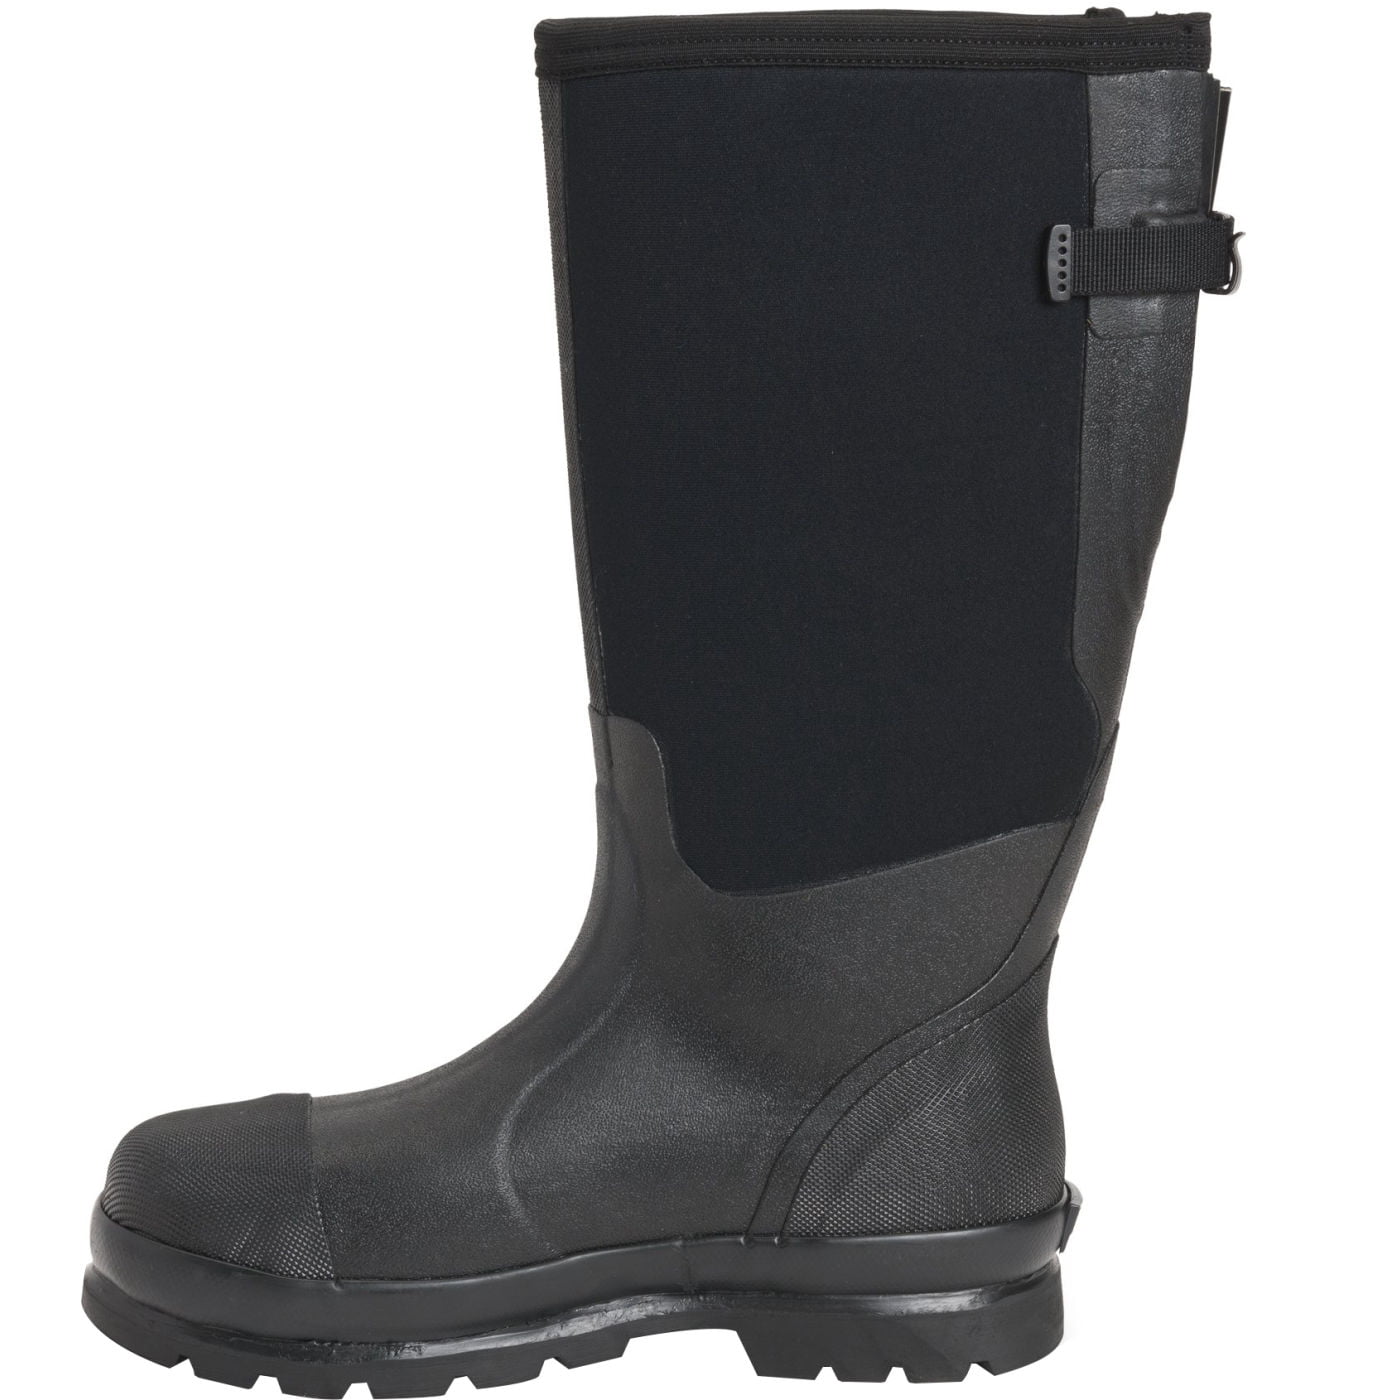 Muck Boots Chore Classic Tall Steel Toe Mens Rubber Work Boot 